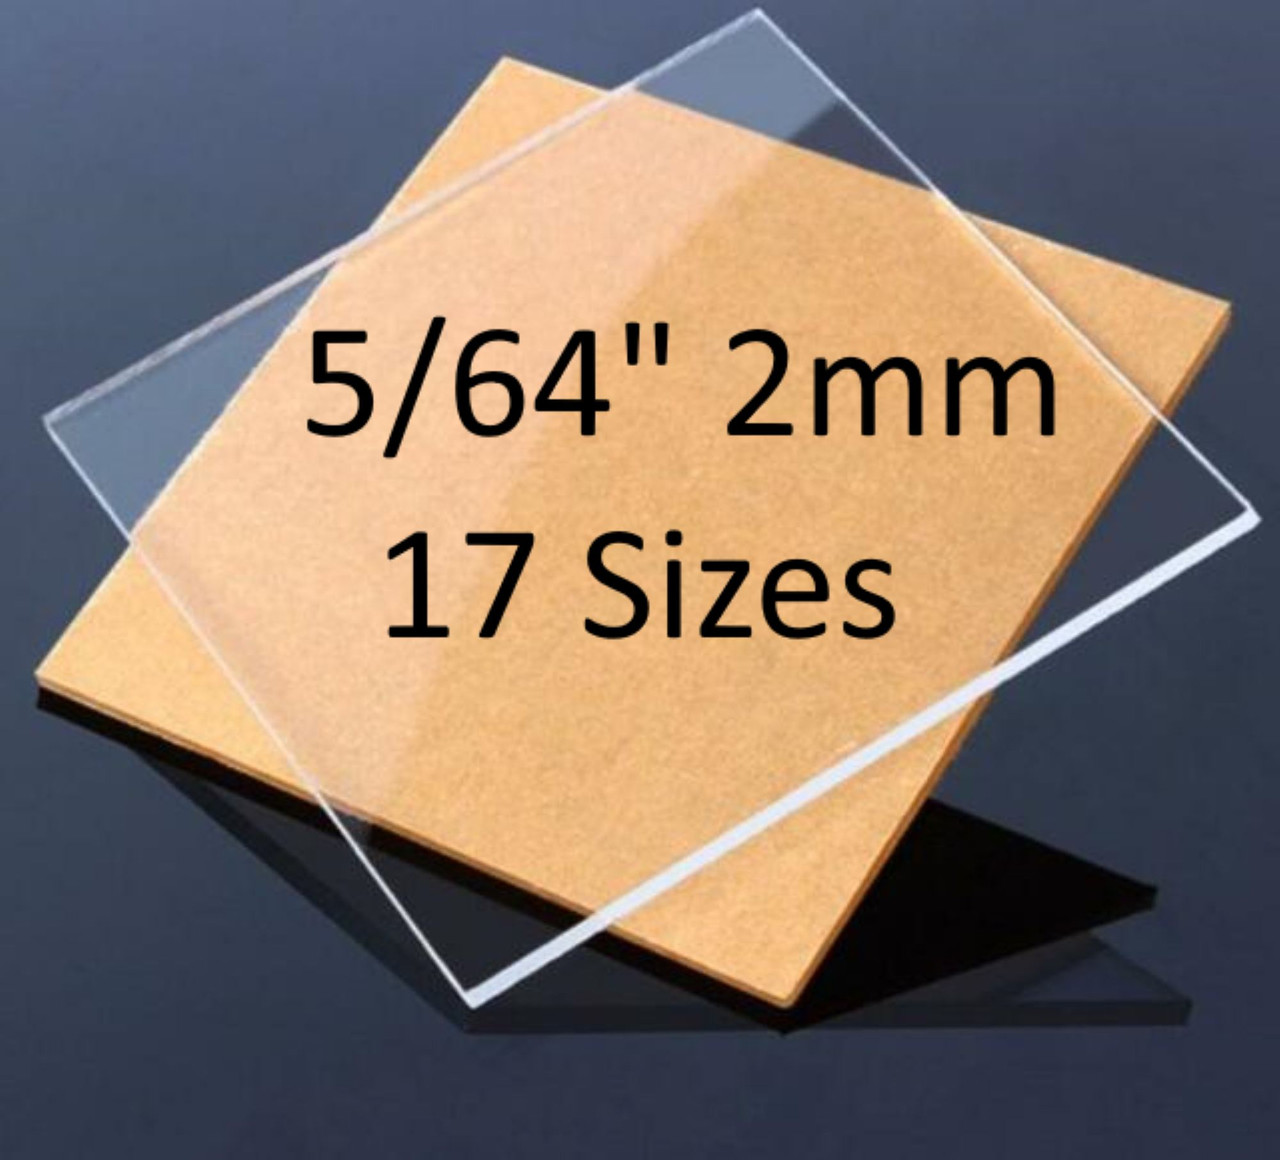 CLEAR Cast Acrylic Plexiglass Sheets 5/64” Thick (2mm) Easy to Cut Plastic  Plexi Glass with Protective Paper for Signs, DIY Display Projects, Crafts,  Shelves